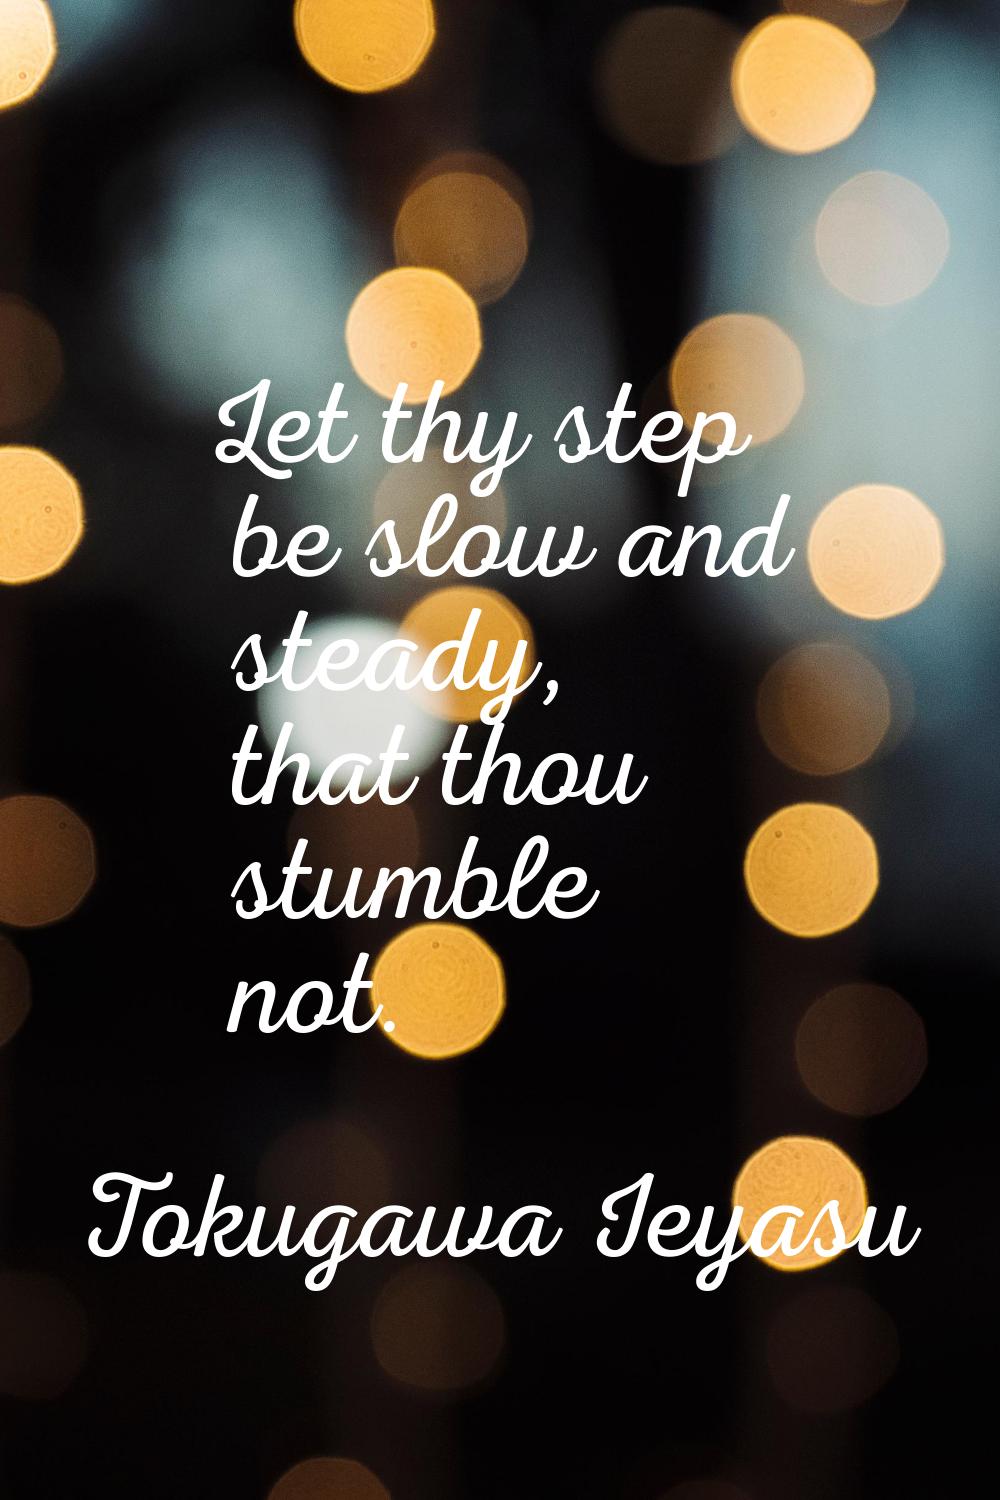 Let thy step be slow and steady, that thou stumble not.